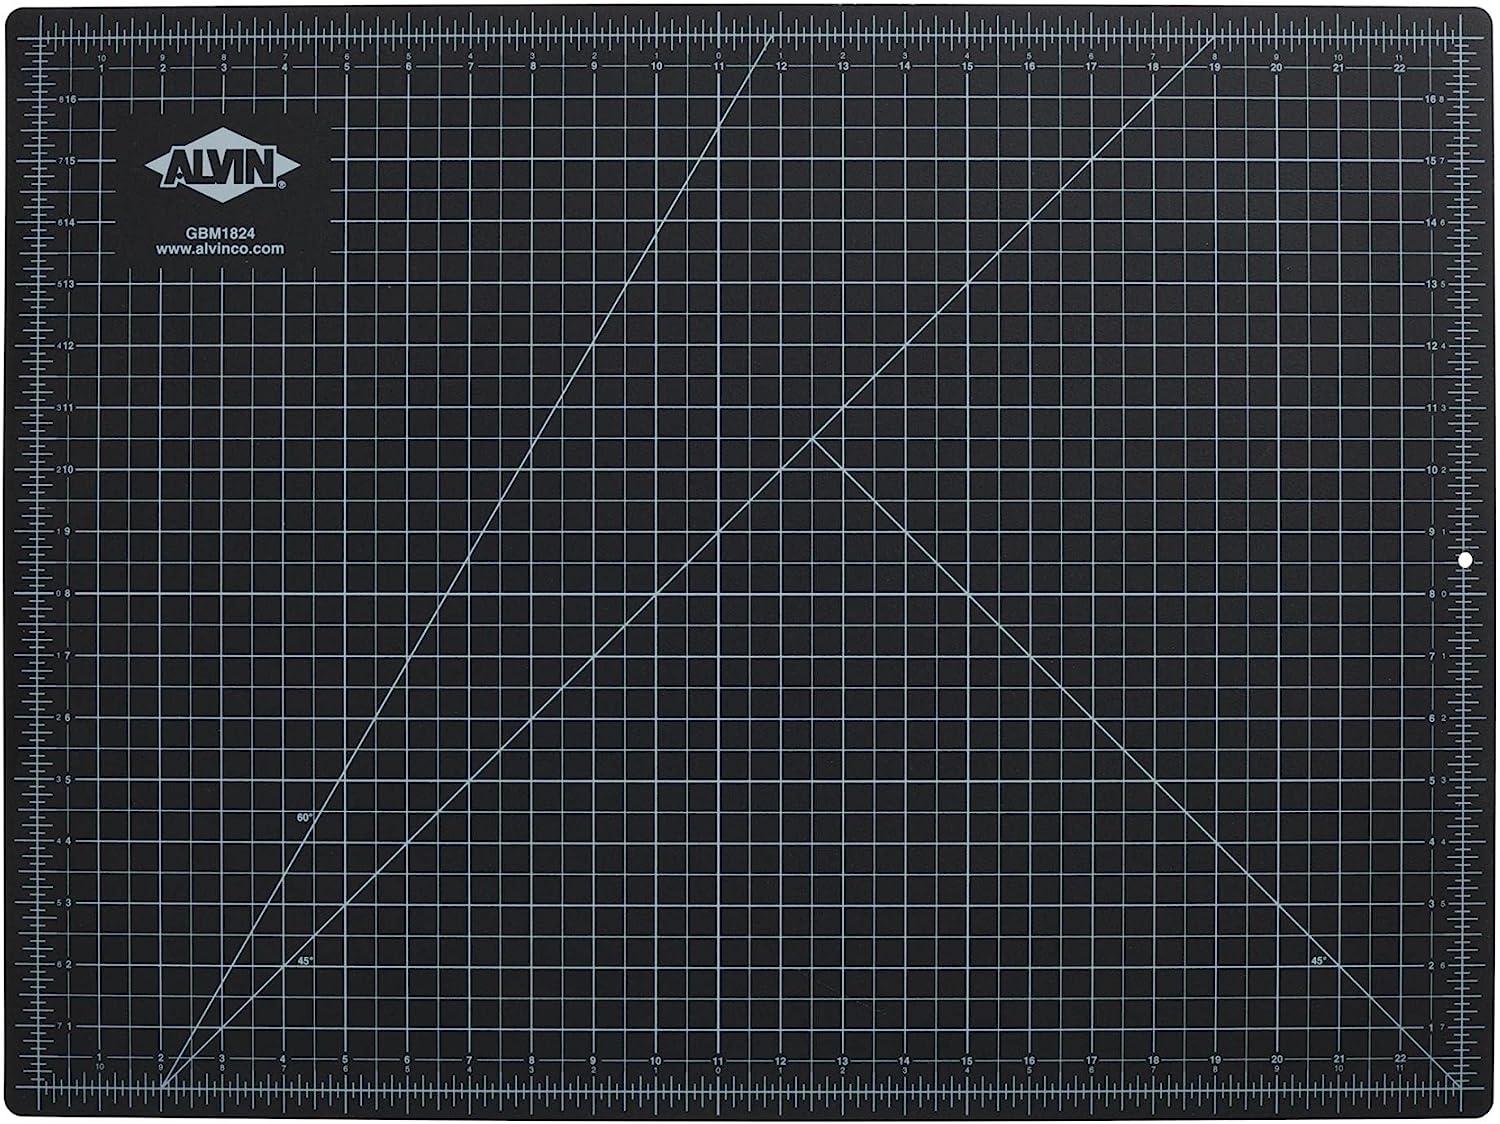  ALVIN Cutting Mat Professional Self-Healing 8.5x12 Model  GBM0812 Green/Black Double-Sided, Rotary Cutting Board for Crafts, Sewing,  Fabric - 8.5 x 12 inches : Arts, Crafts & Sewing